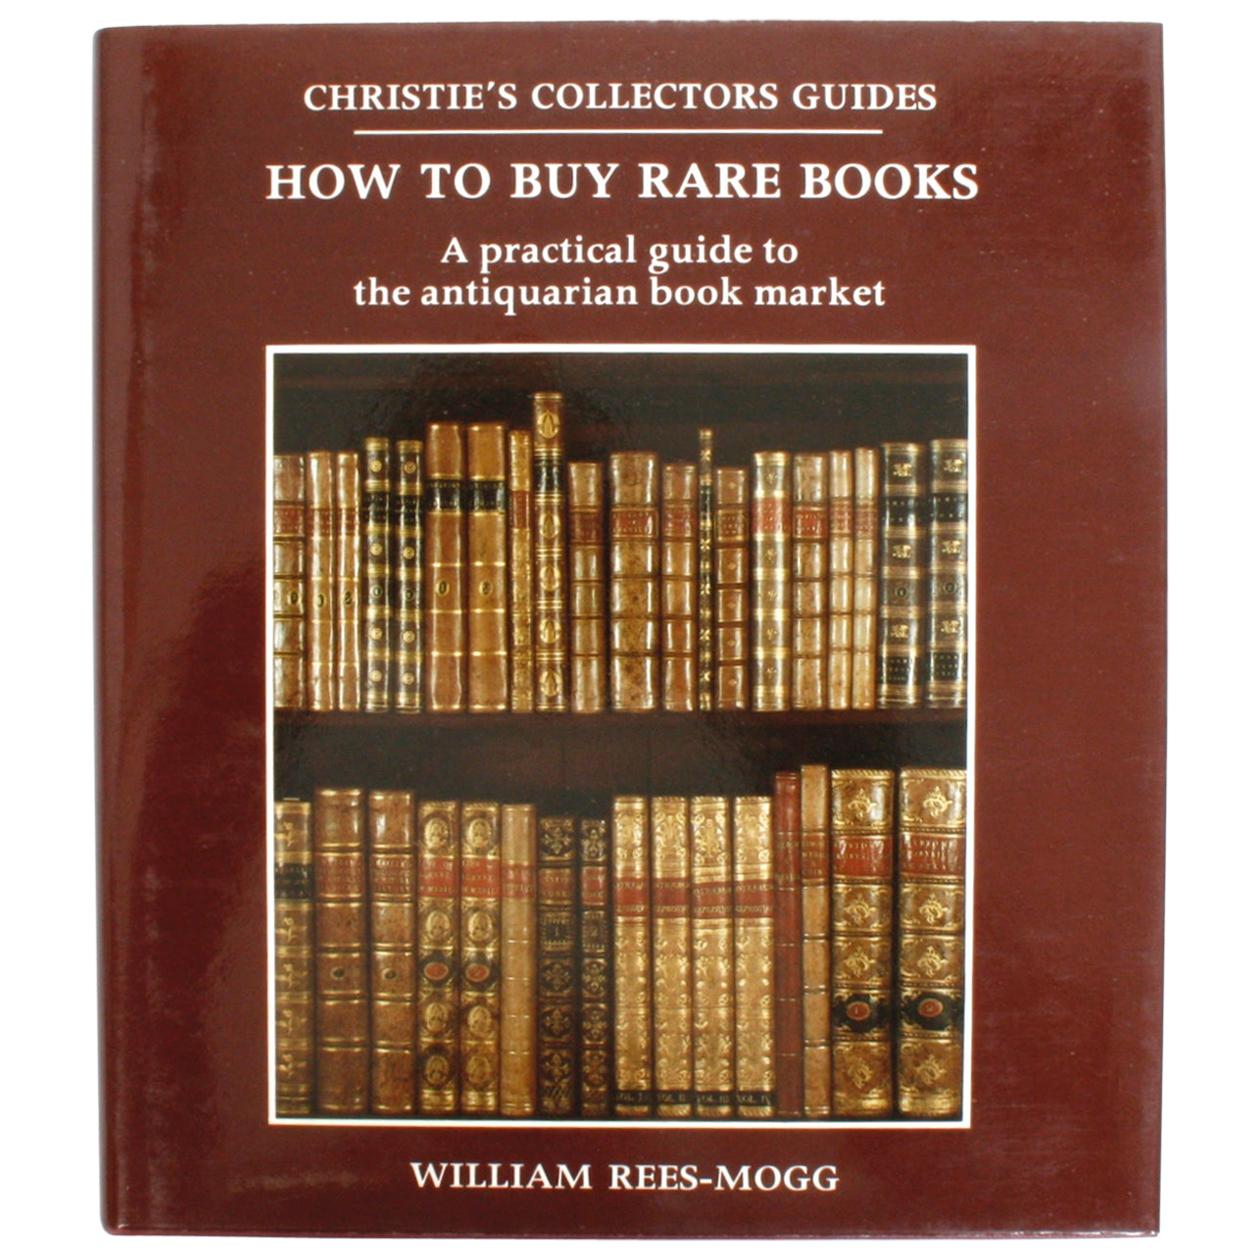 How to Buy Rare Books by William Rees-Mogg, First Edition